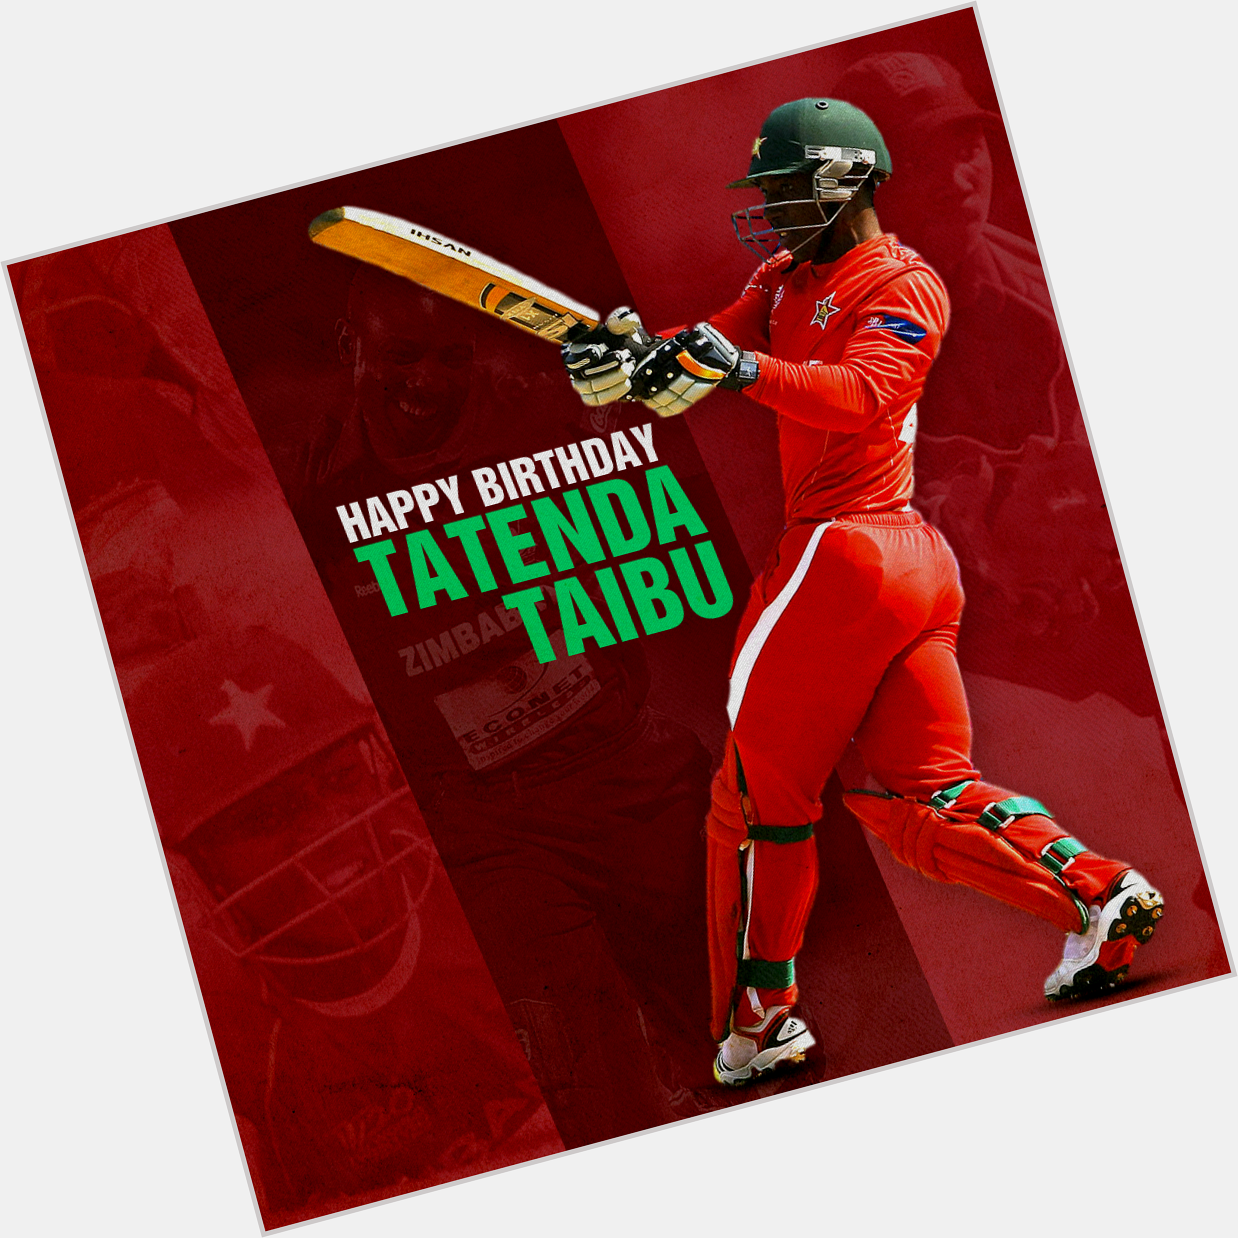 Here\s wishing the youngest ever captain in the history of Test Cricket, Tatenda Taibu, a very happy birthday 